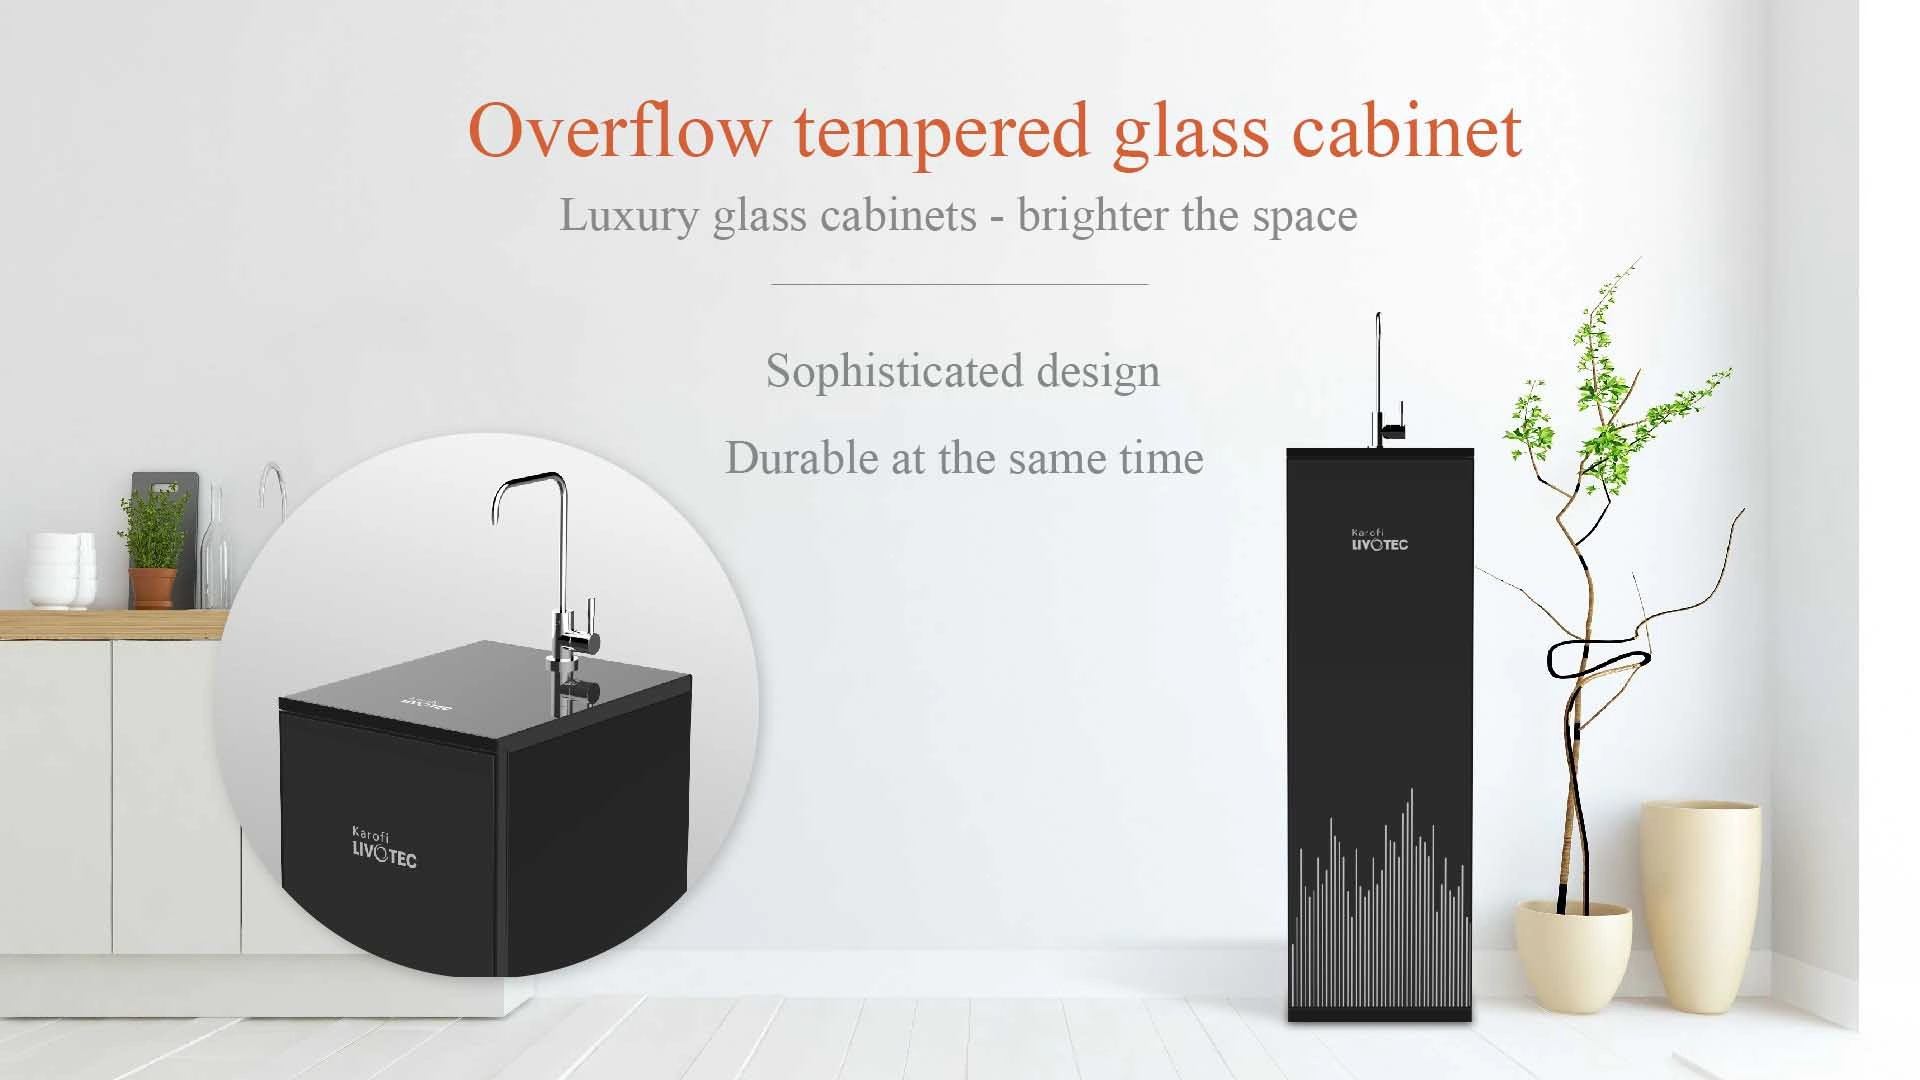 Overflow tempered glass cabinet